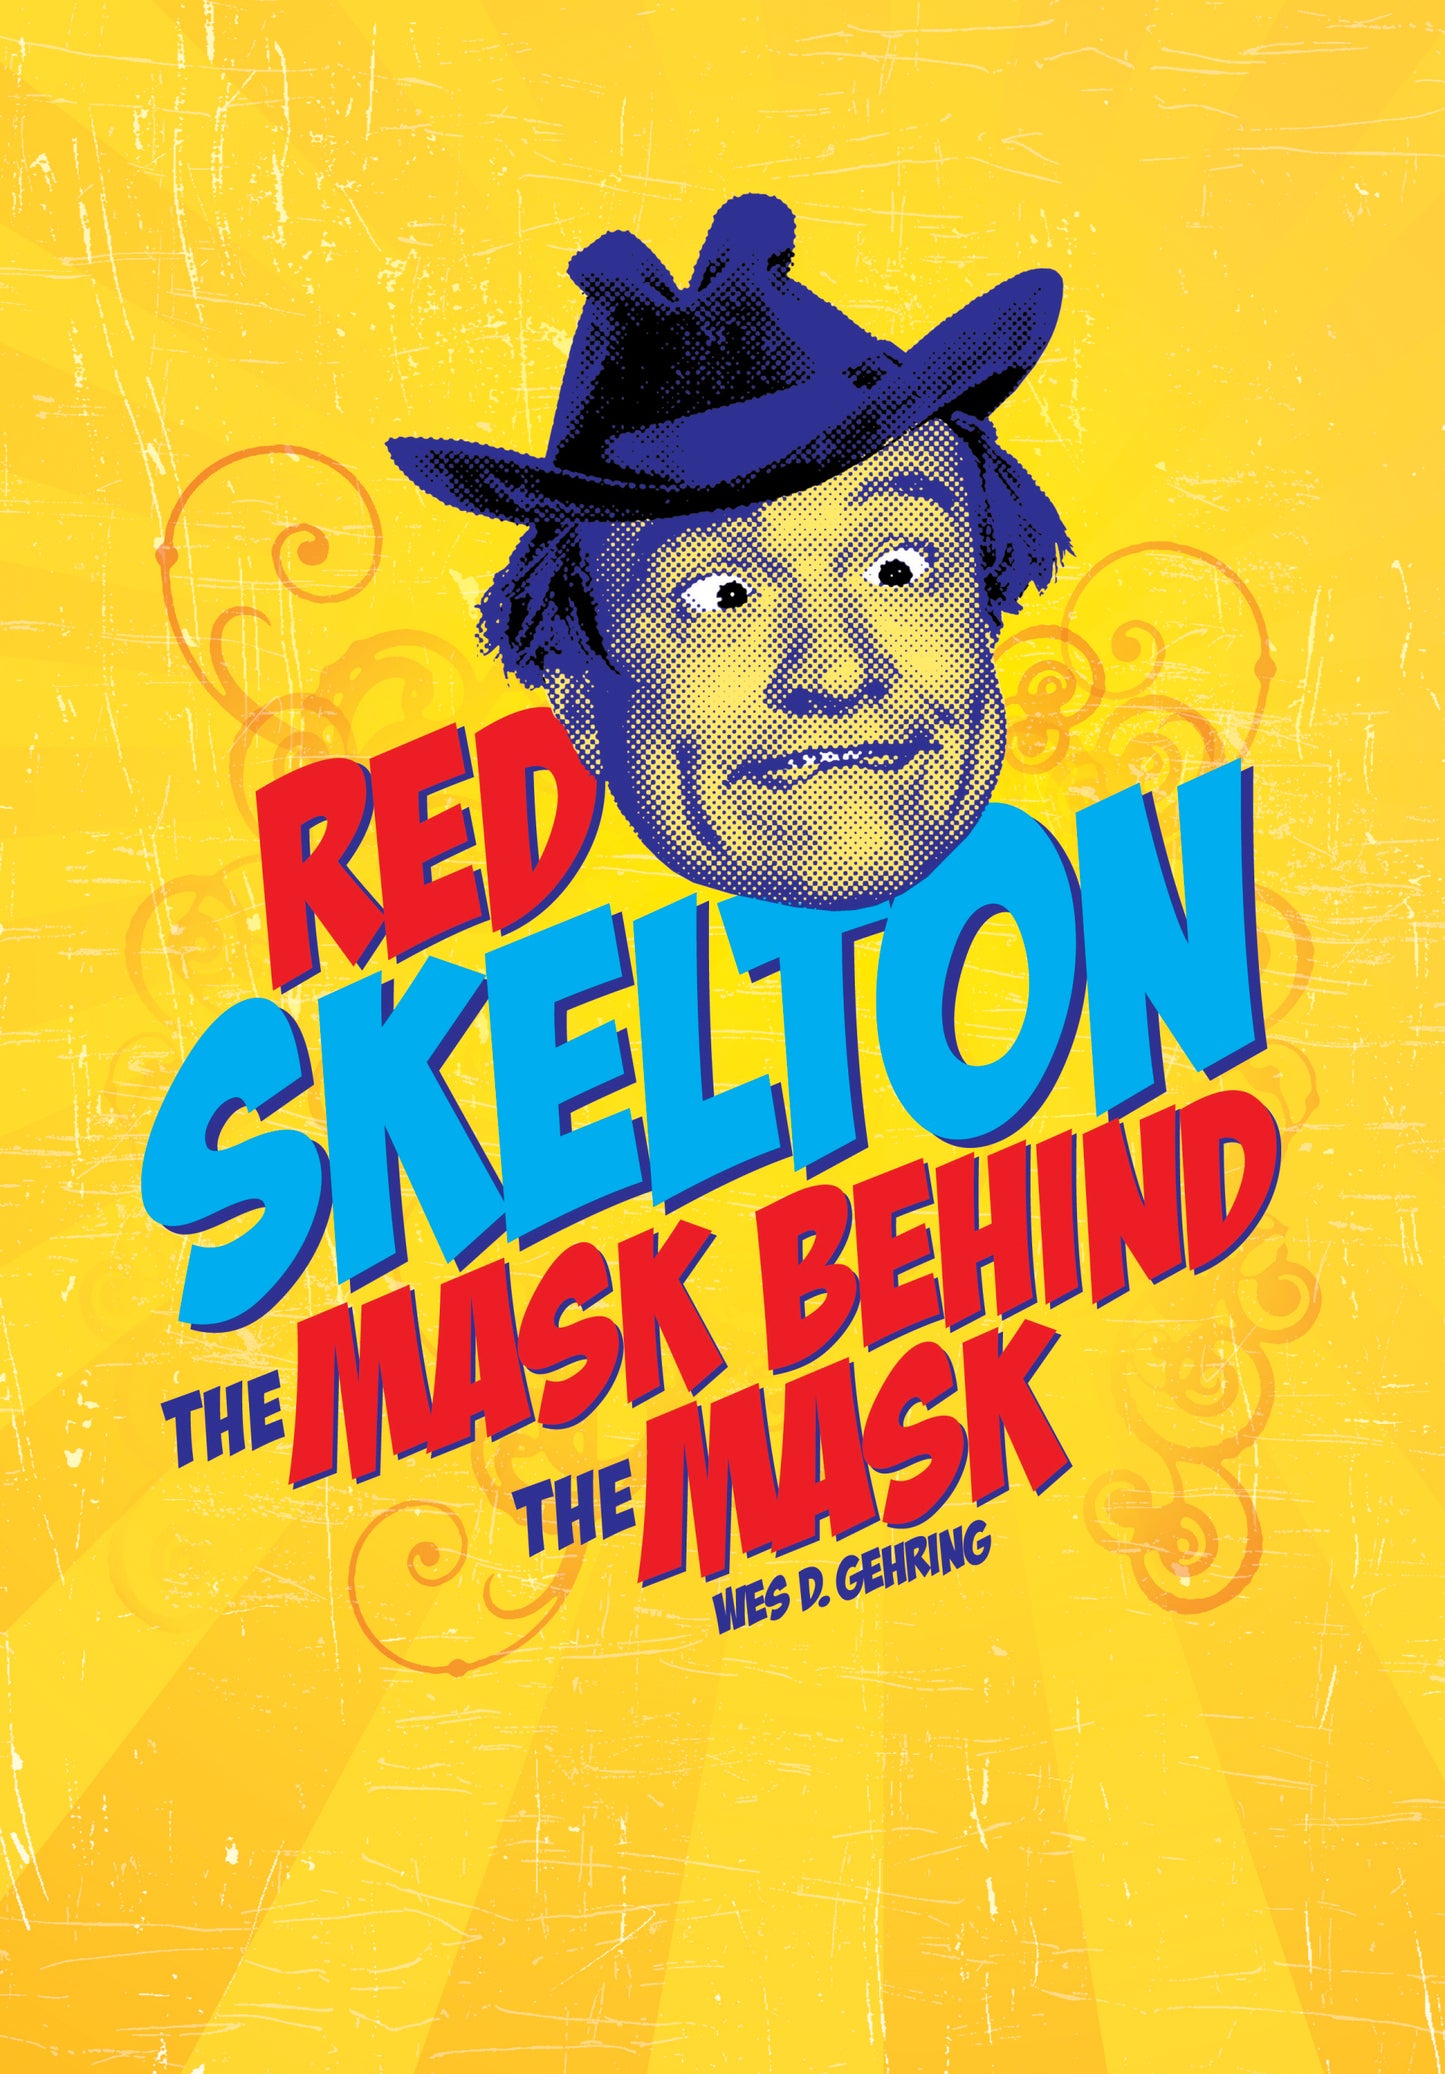 Red Skelton: The Man Behind the Mask